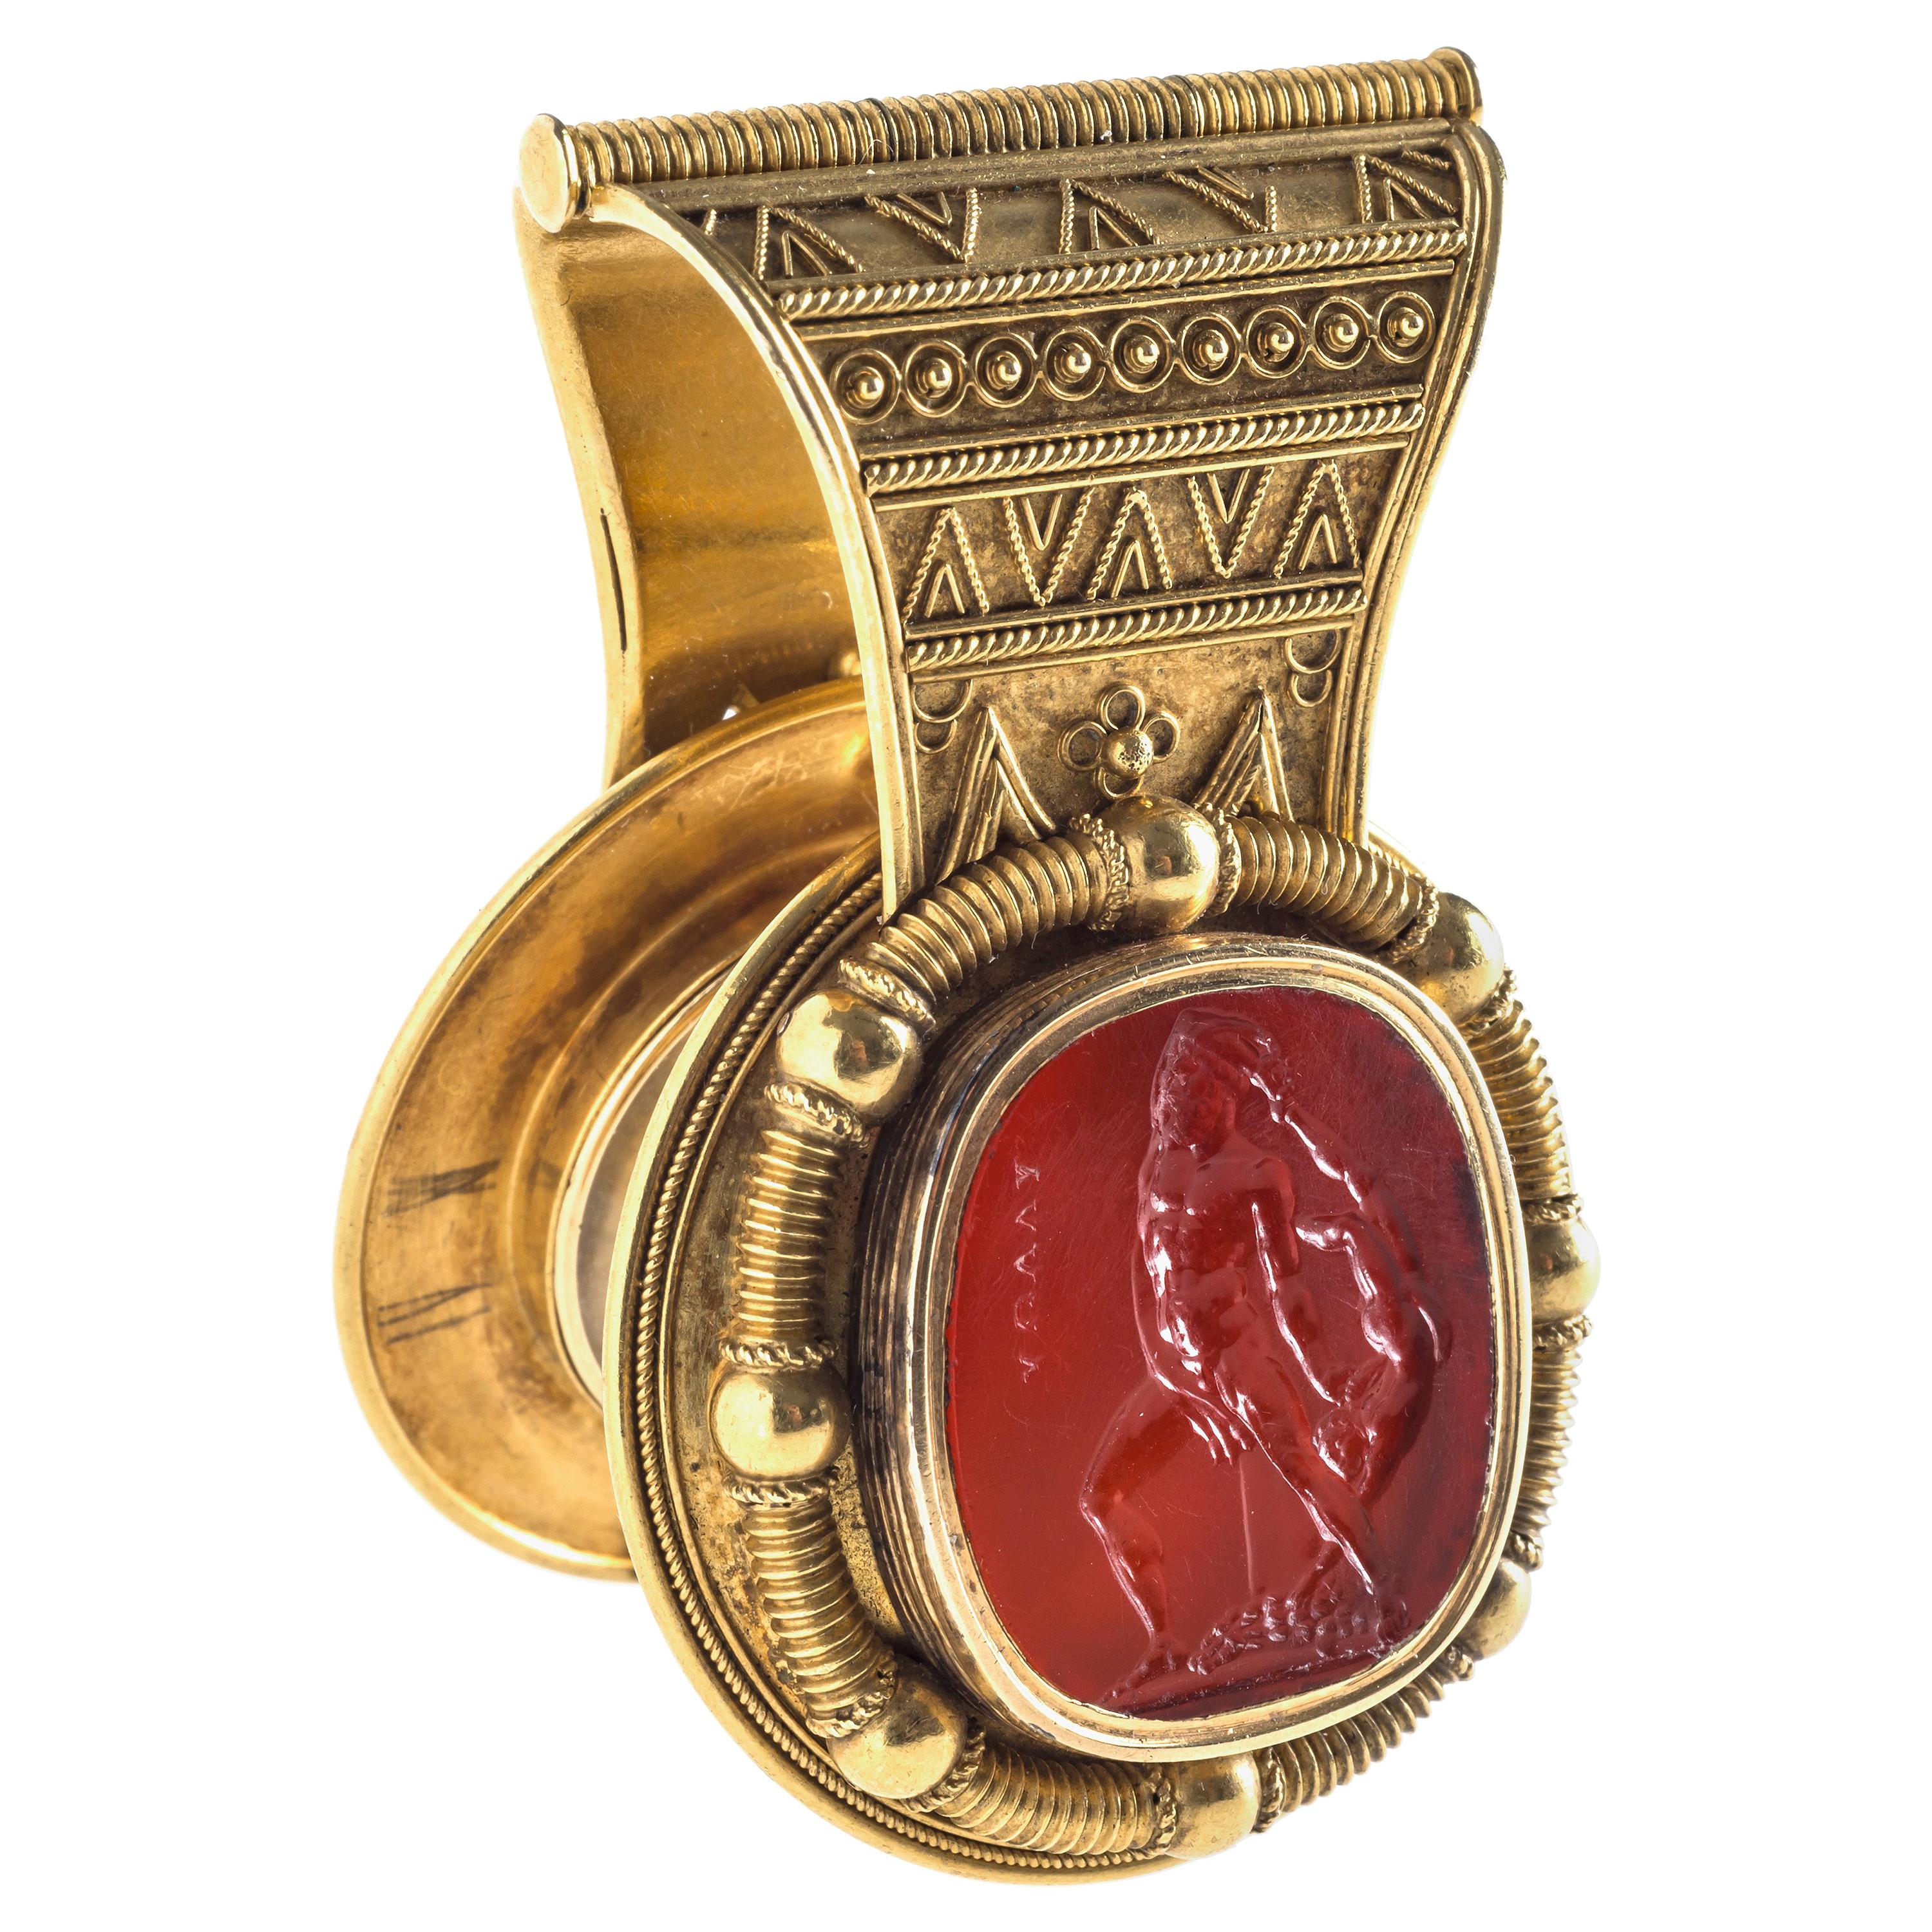 Golden bulla worked in 18K in the neoarchaeological style with a carnelian intaglio of Hercules and the boy Telephus. The hinged bulla can be opened to reveal a glass locket on the inside. The intaglio is set in a golden frame surrounded by tubular